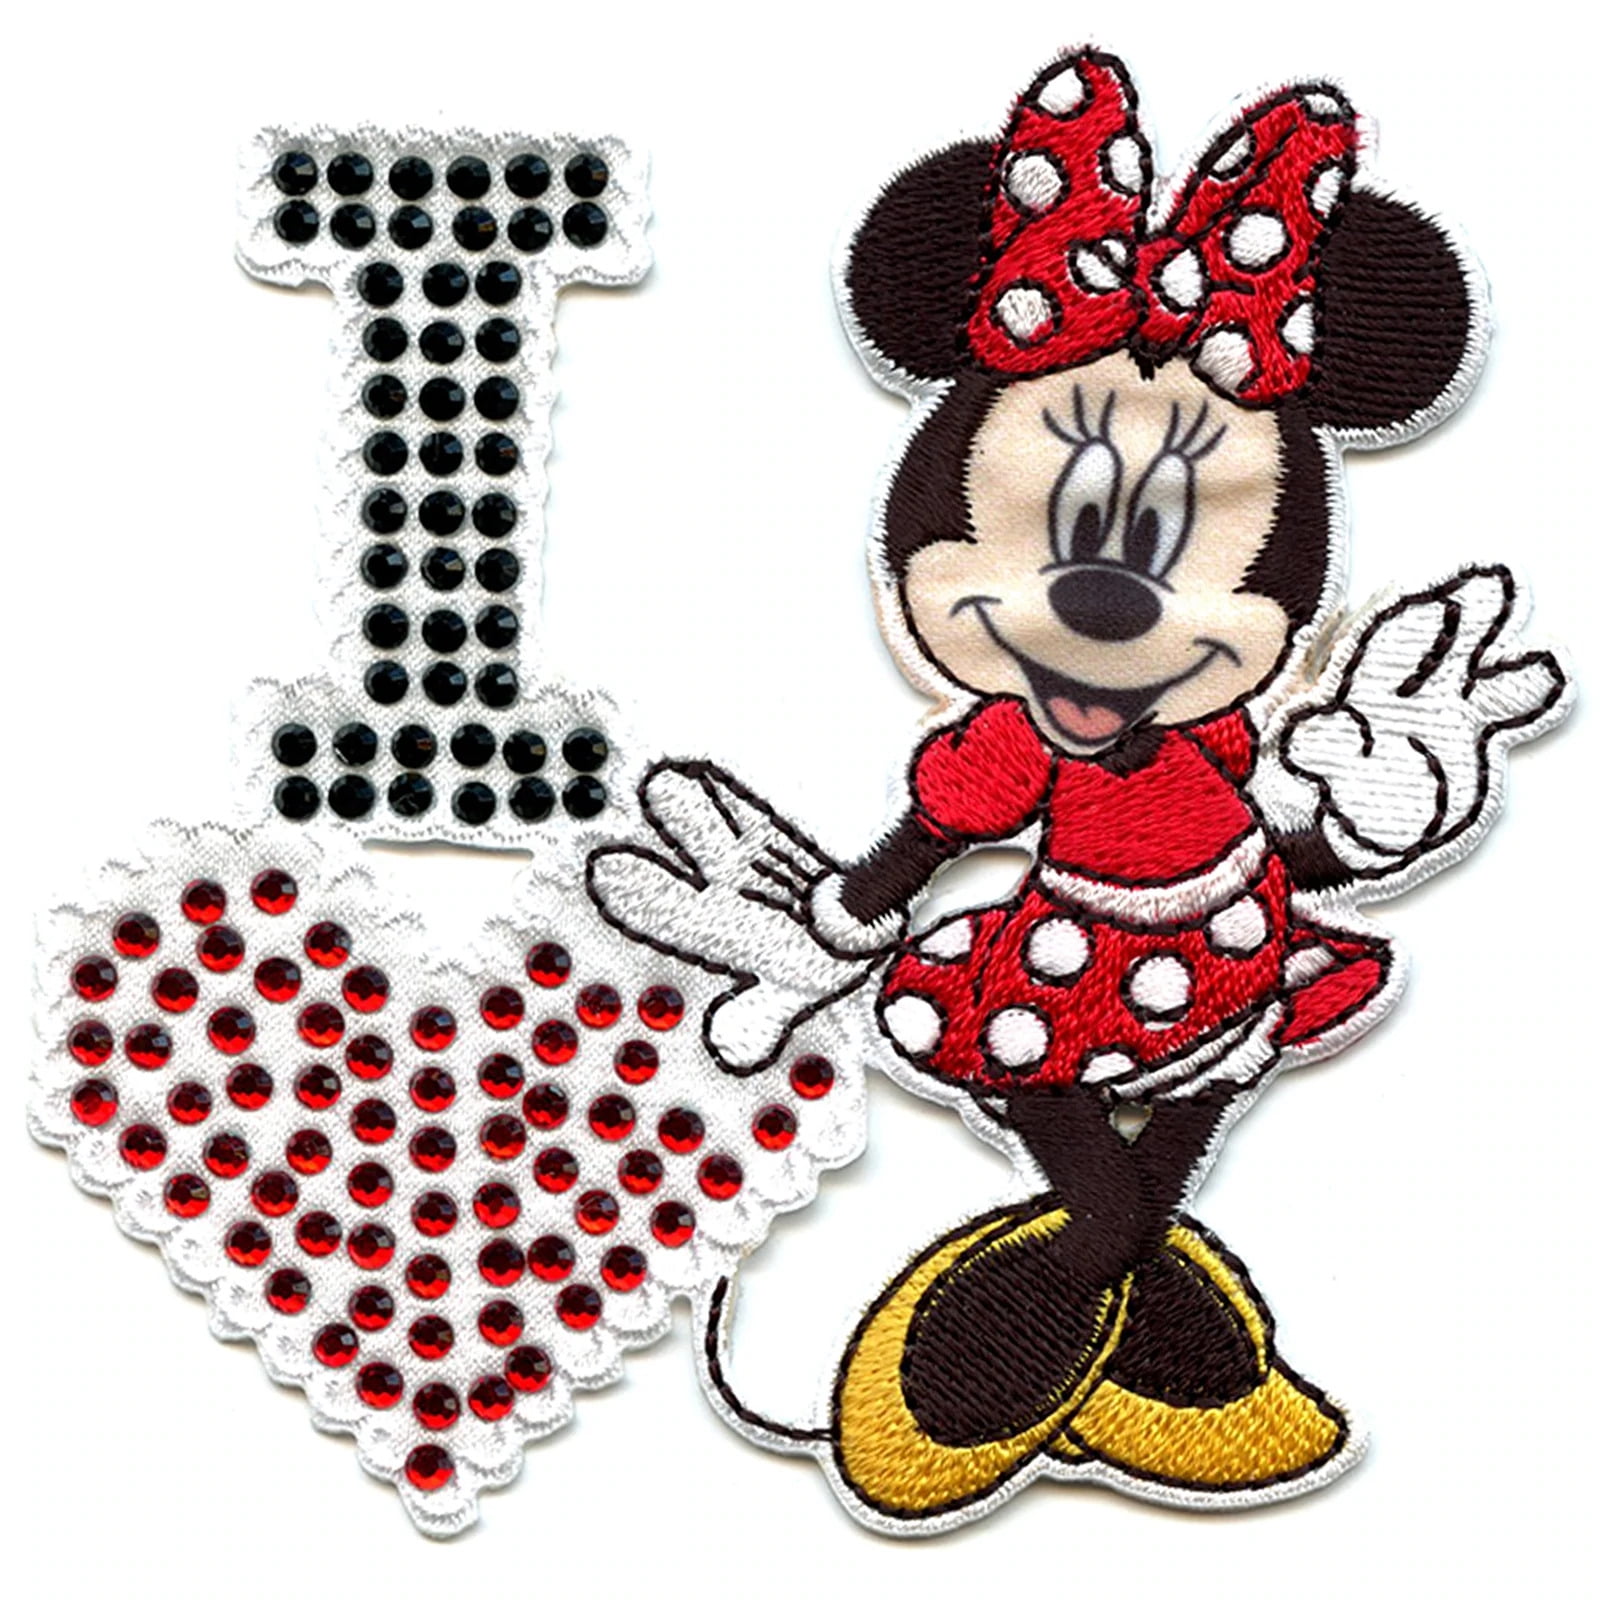 Vintage Style Mickey Iron on Patch School Girl Minnie Mouse Iron On Patch